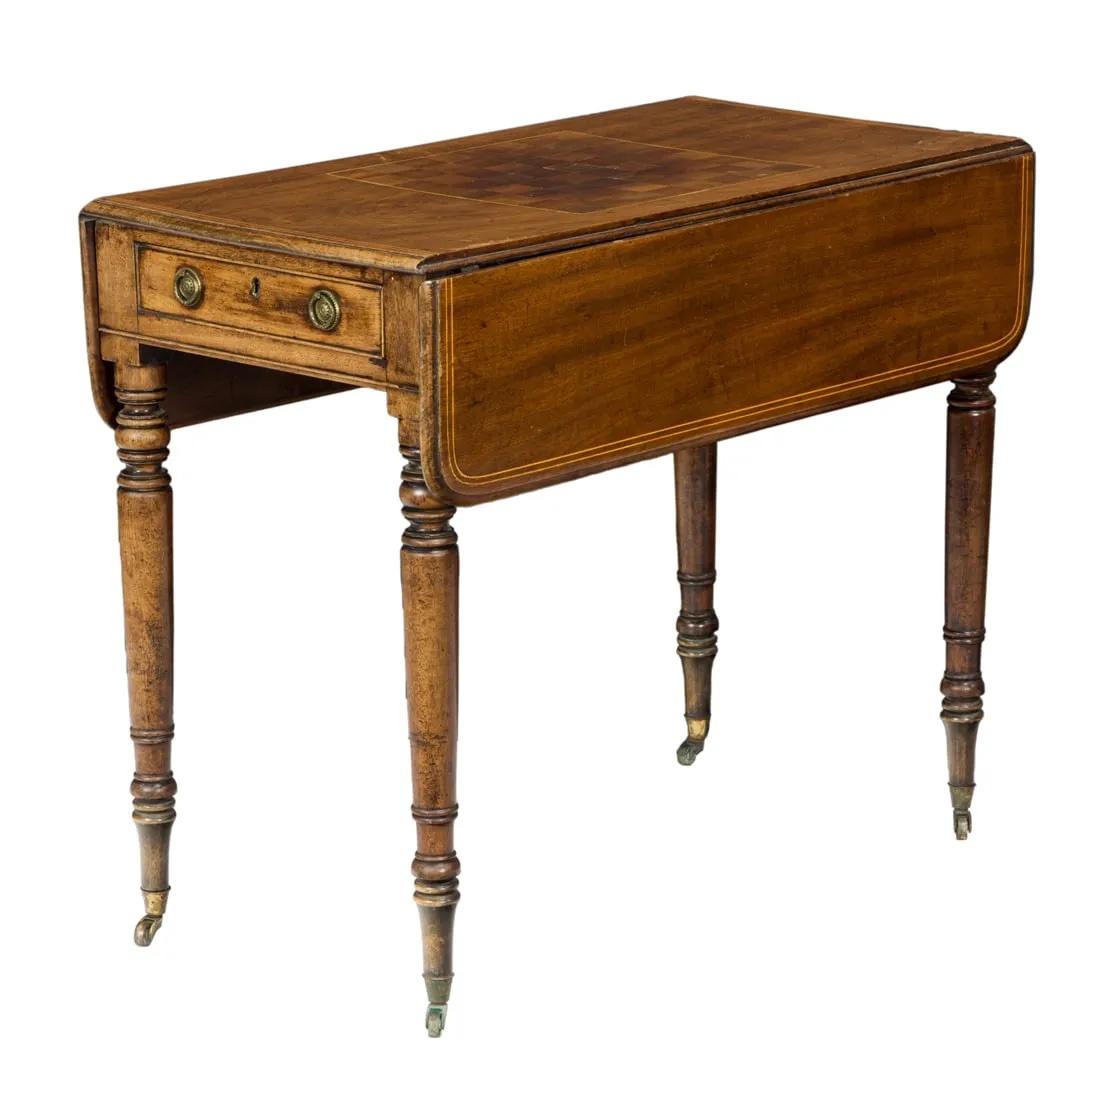 Circa 1800 Antique Period English Regency Mahogany Line Inlay Drop Leaf Games Table with a single drawer surmounting the inlaid playing surface flanked with two drop leaves, and rising on turned legs. Dimensions:  29.5